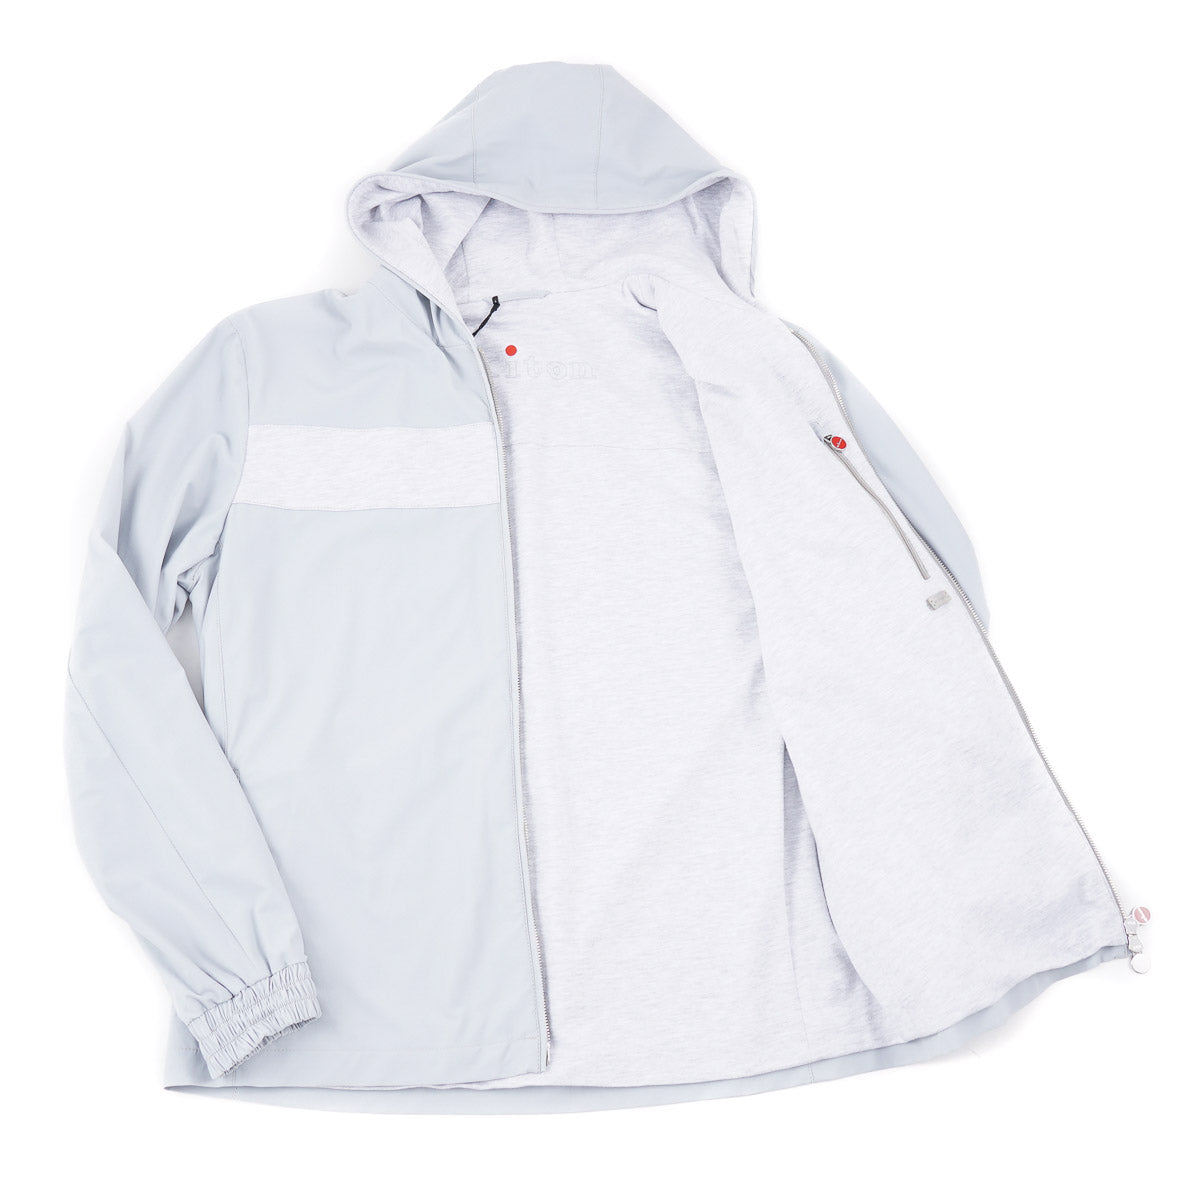 Kiton Hooded Jacket with Jersey Cotton Lining - Top Shelf Apparel